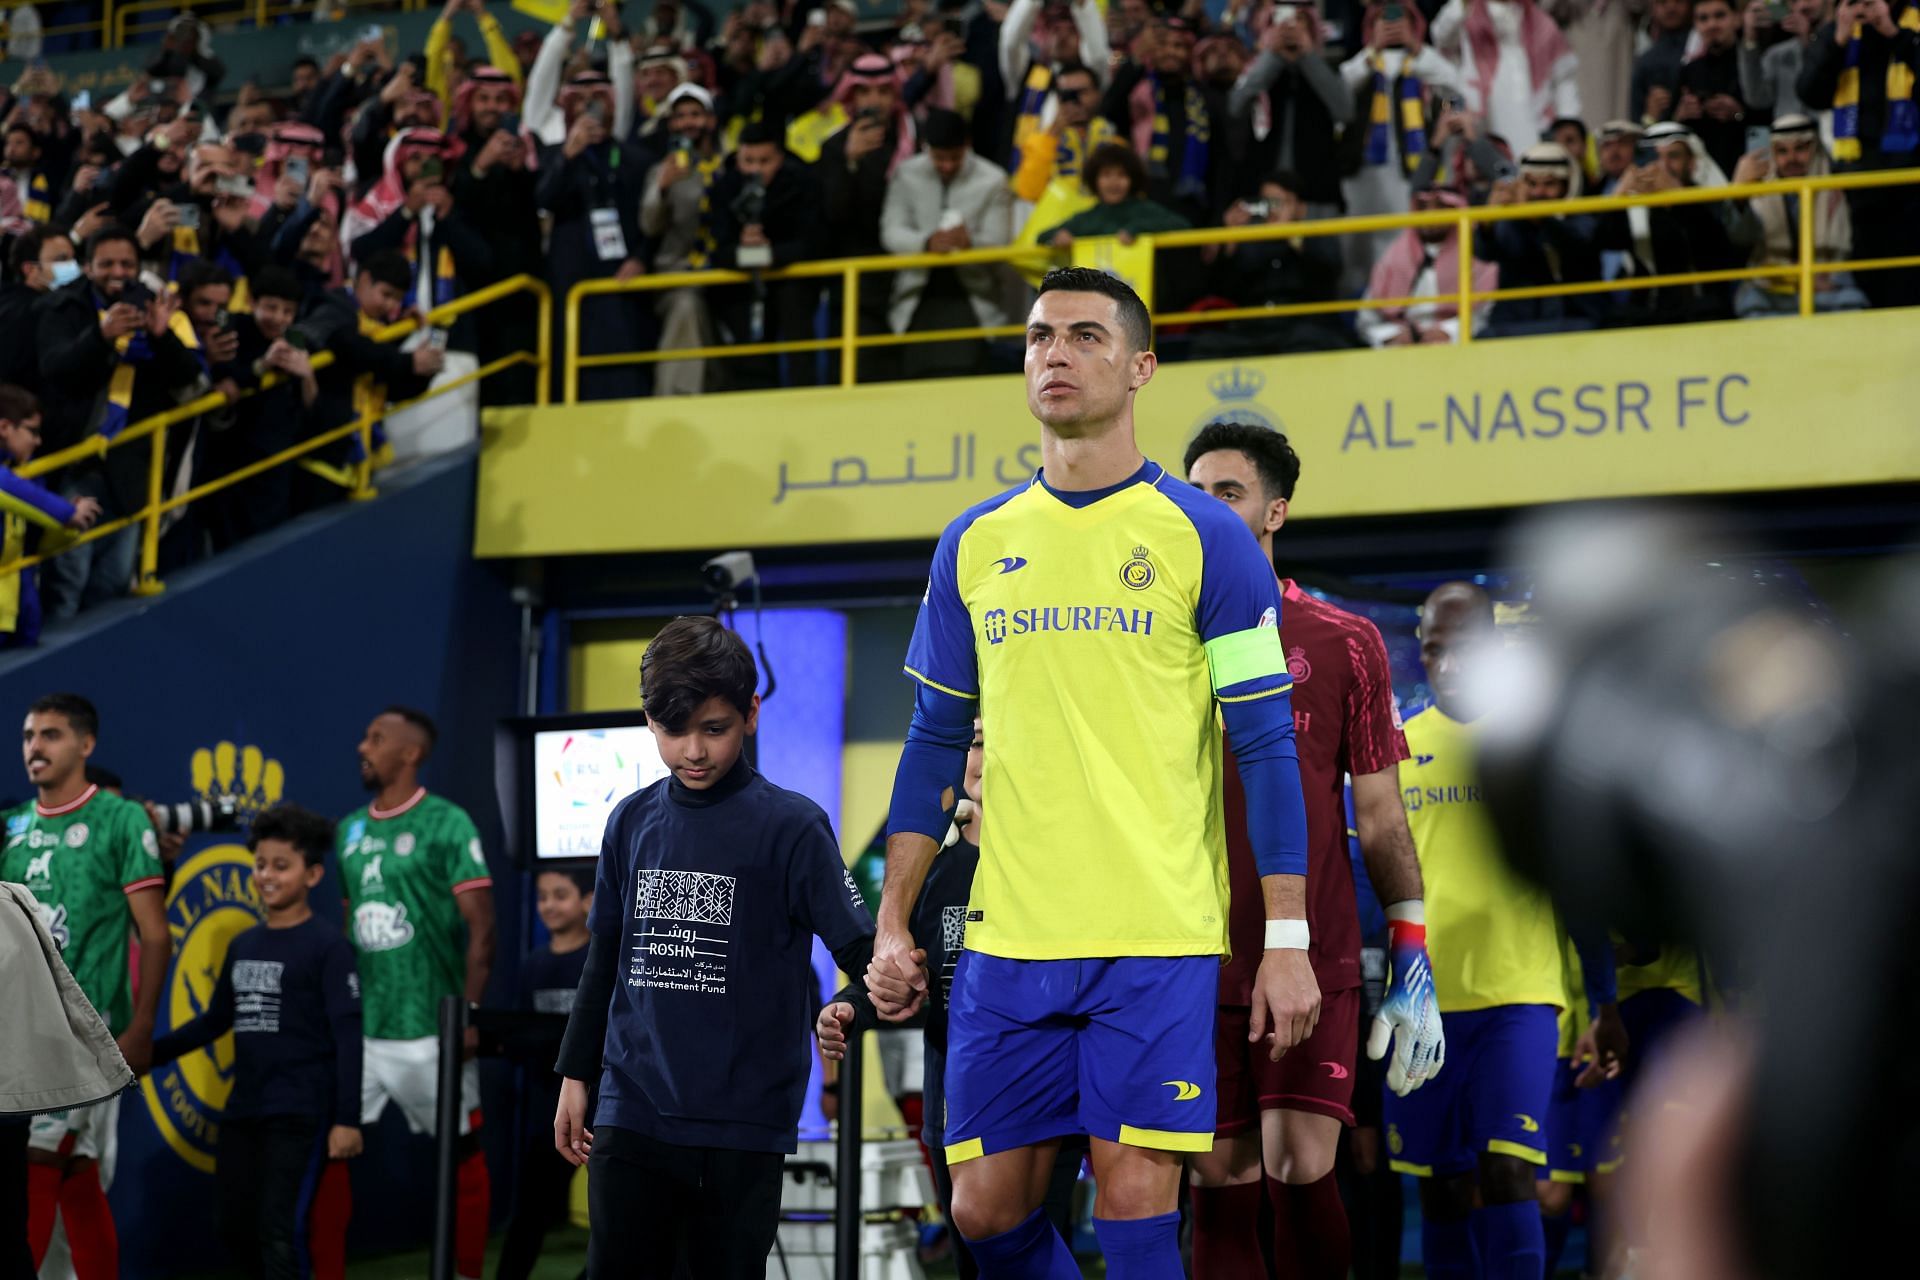 Cristiano Ronaldo, currently at Al Nassr, holds several enviable records in Europe